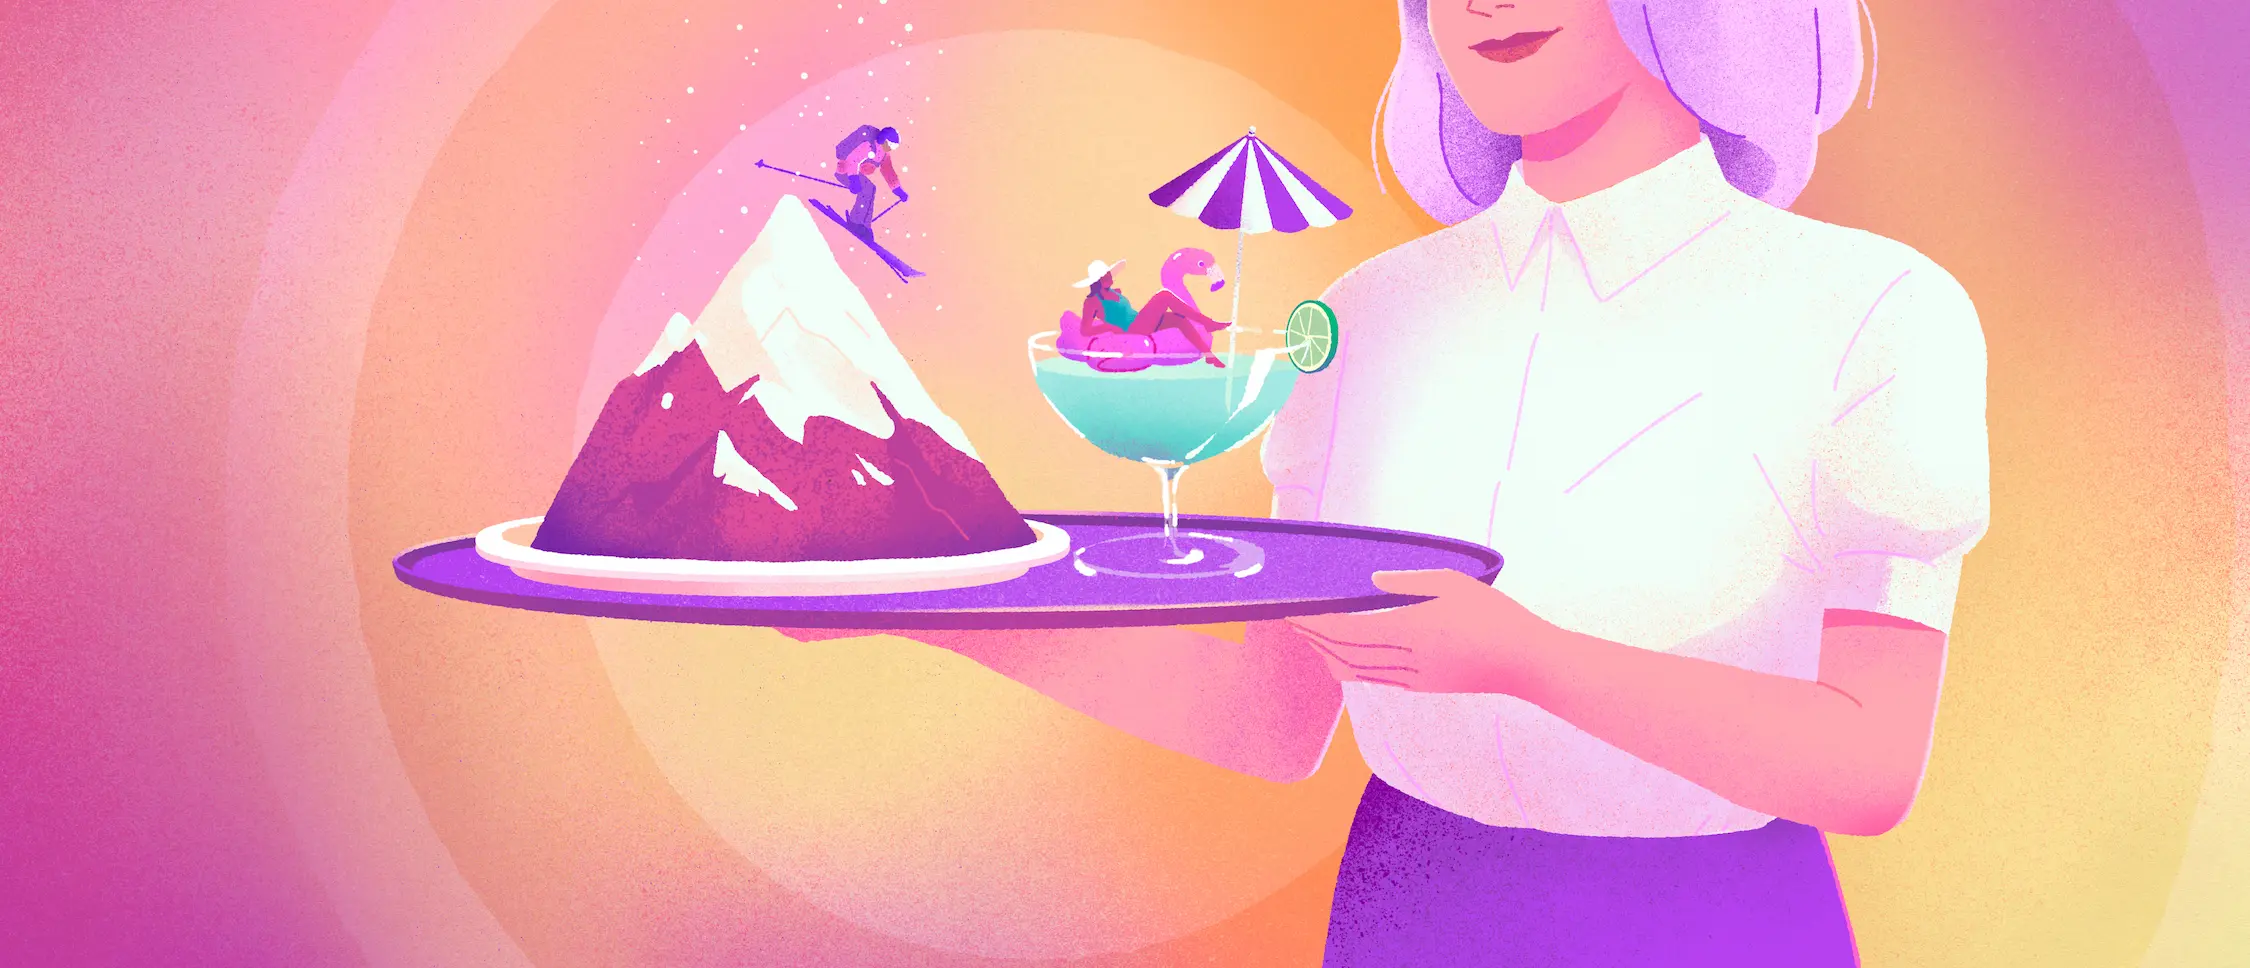 Waitress holding a tray on which there is a mountain with a skier on a plate and a cocktail with a woman on a floating flamingo.